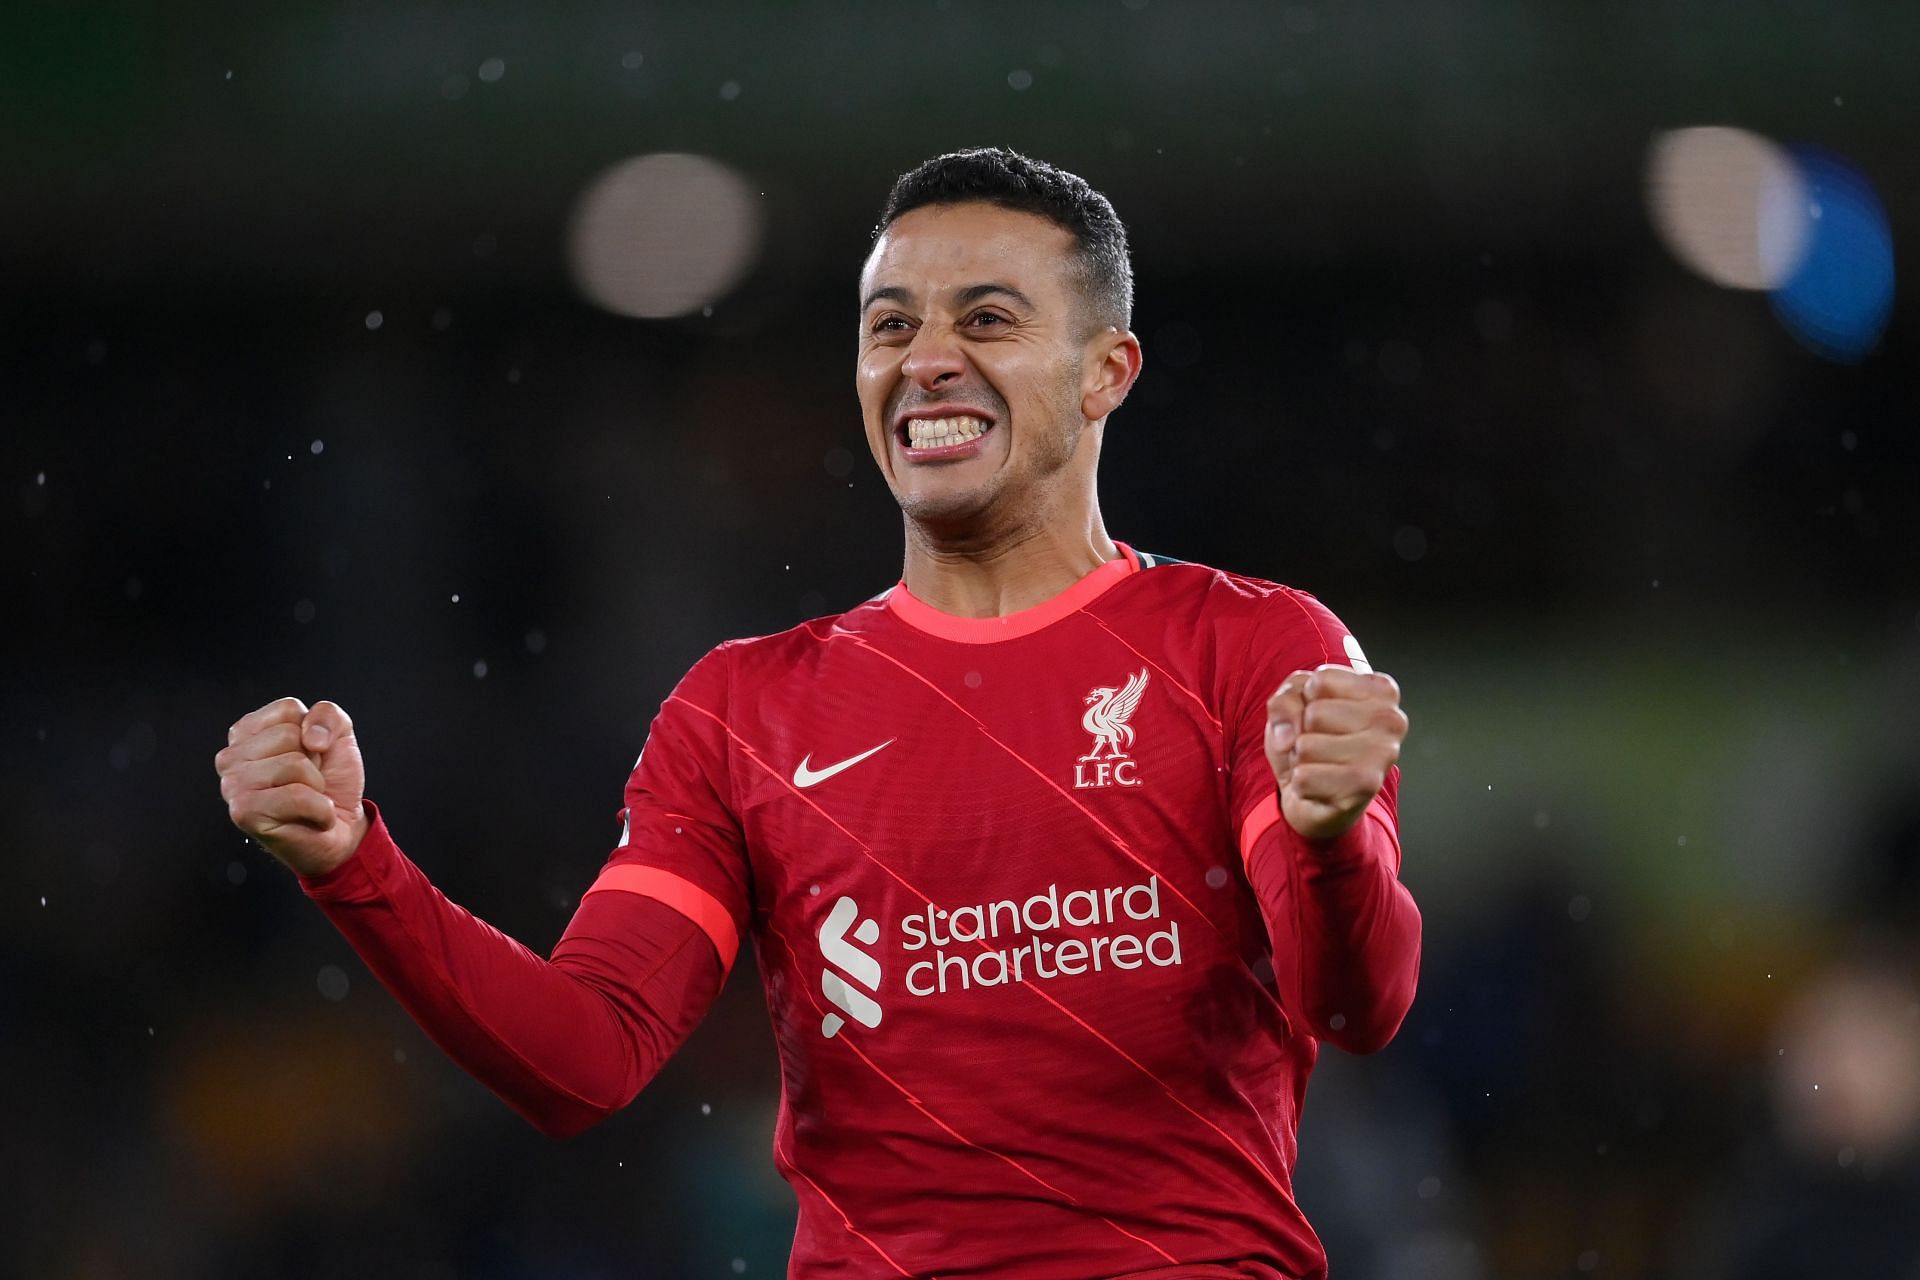 2021 looks much better for Thiago Alcantara as he emerges as the new midfield maestro for Liverpool.